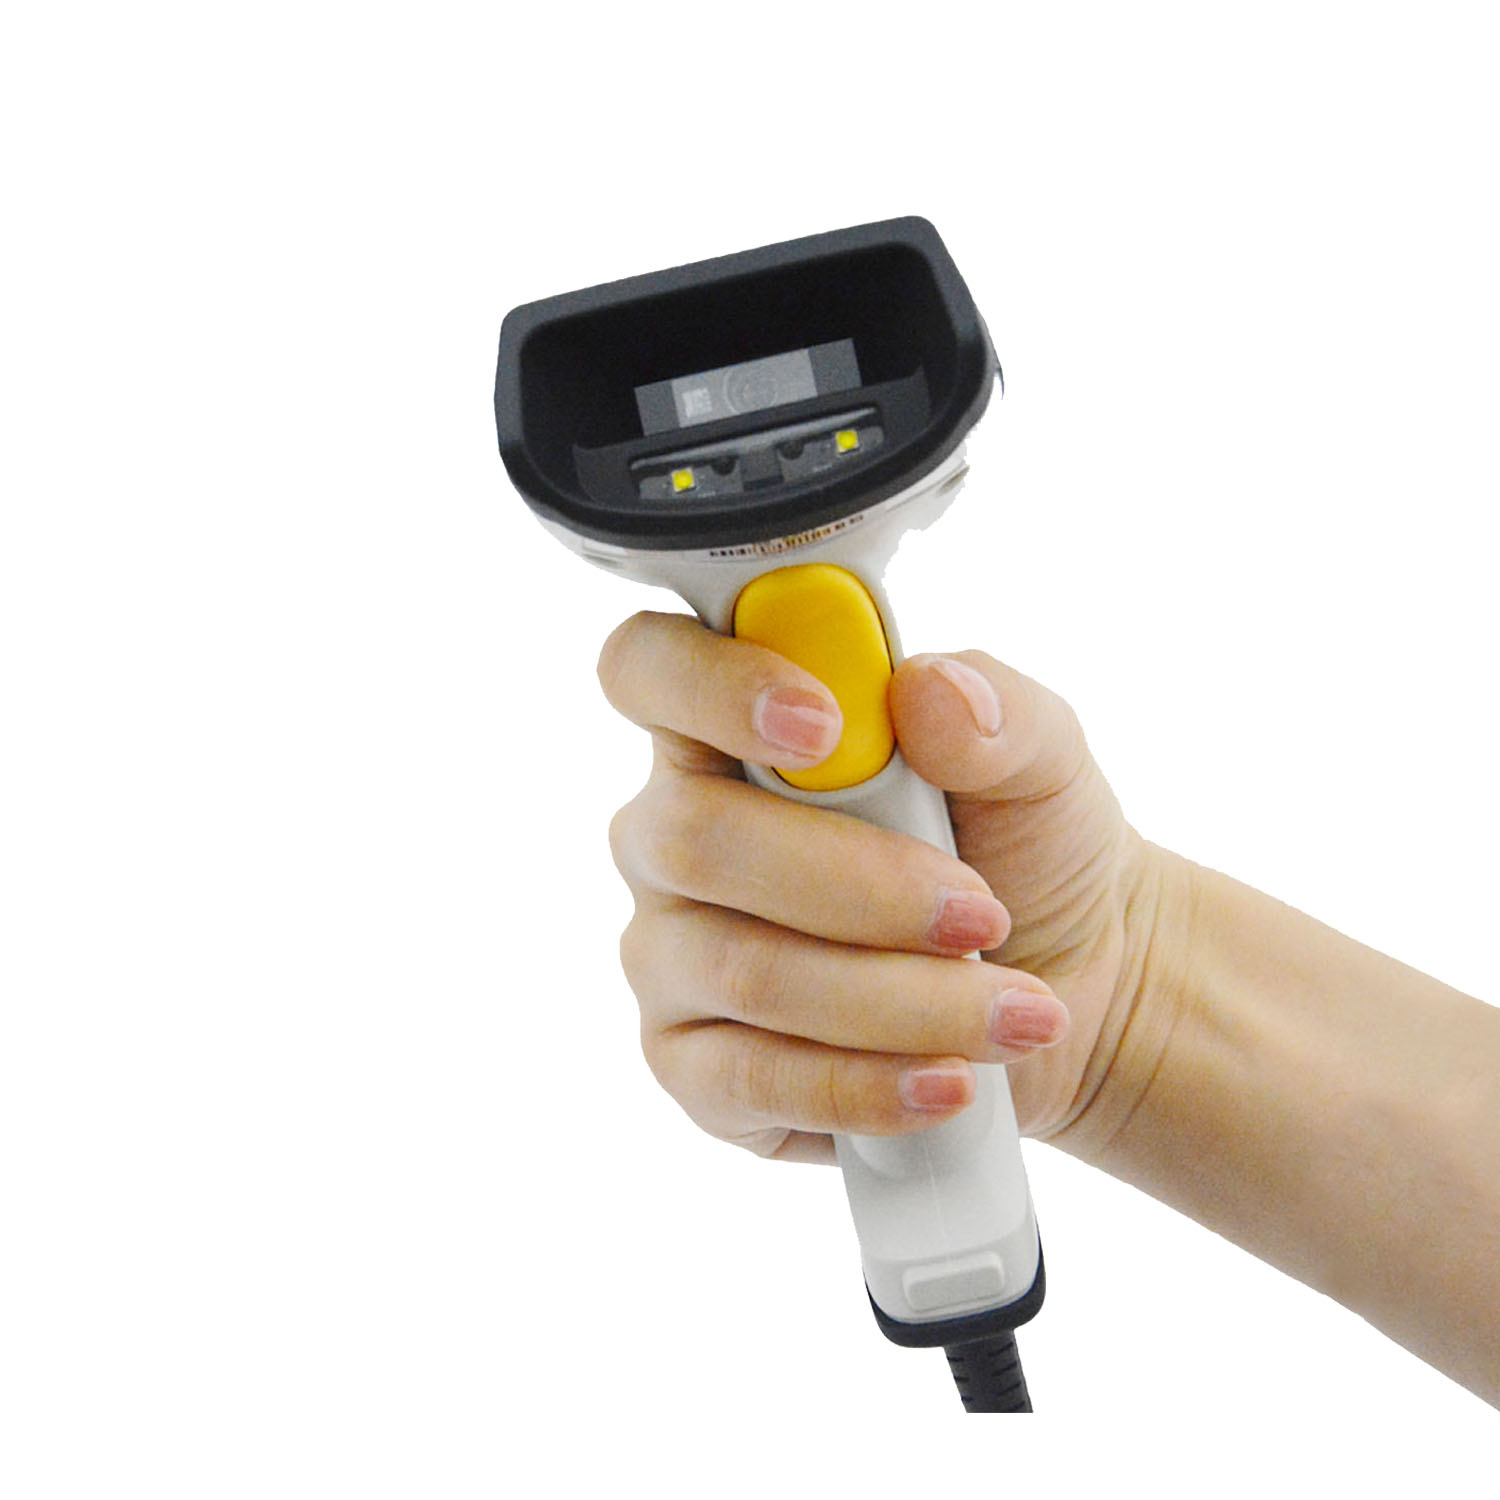 Industrial USB Handheld 1D/2D Barcode Scanner Perfect For Paper&Display Barcode HS-6203